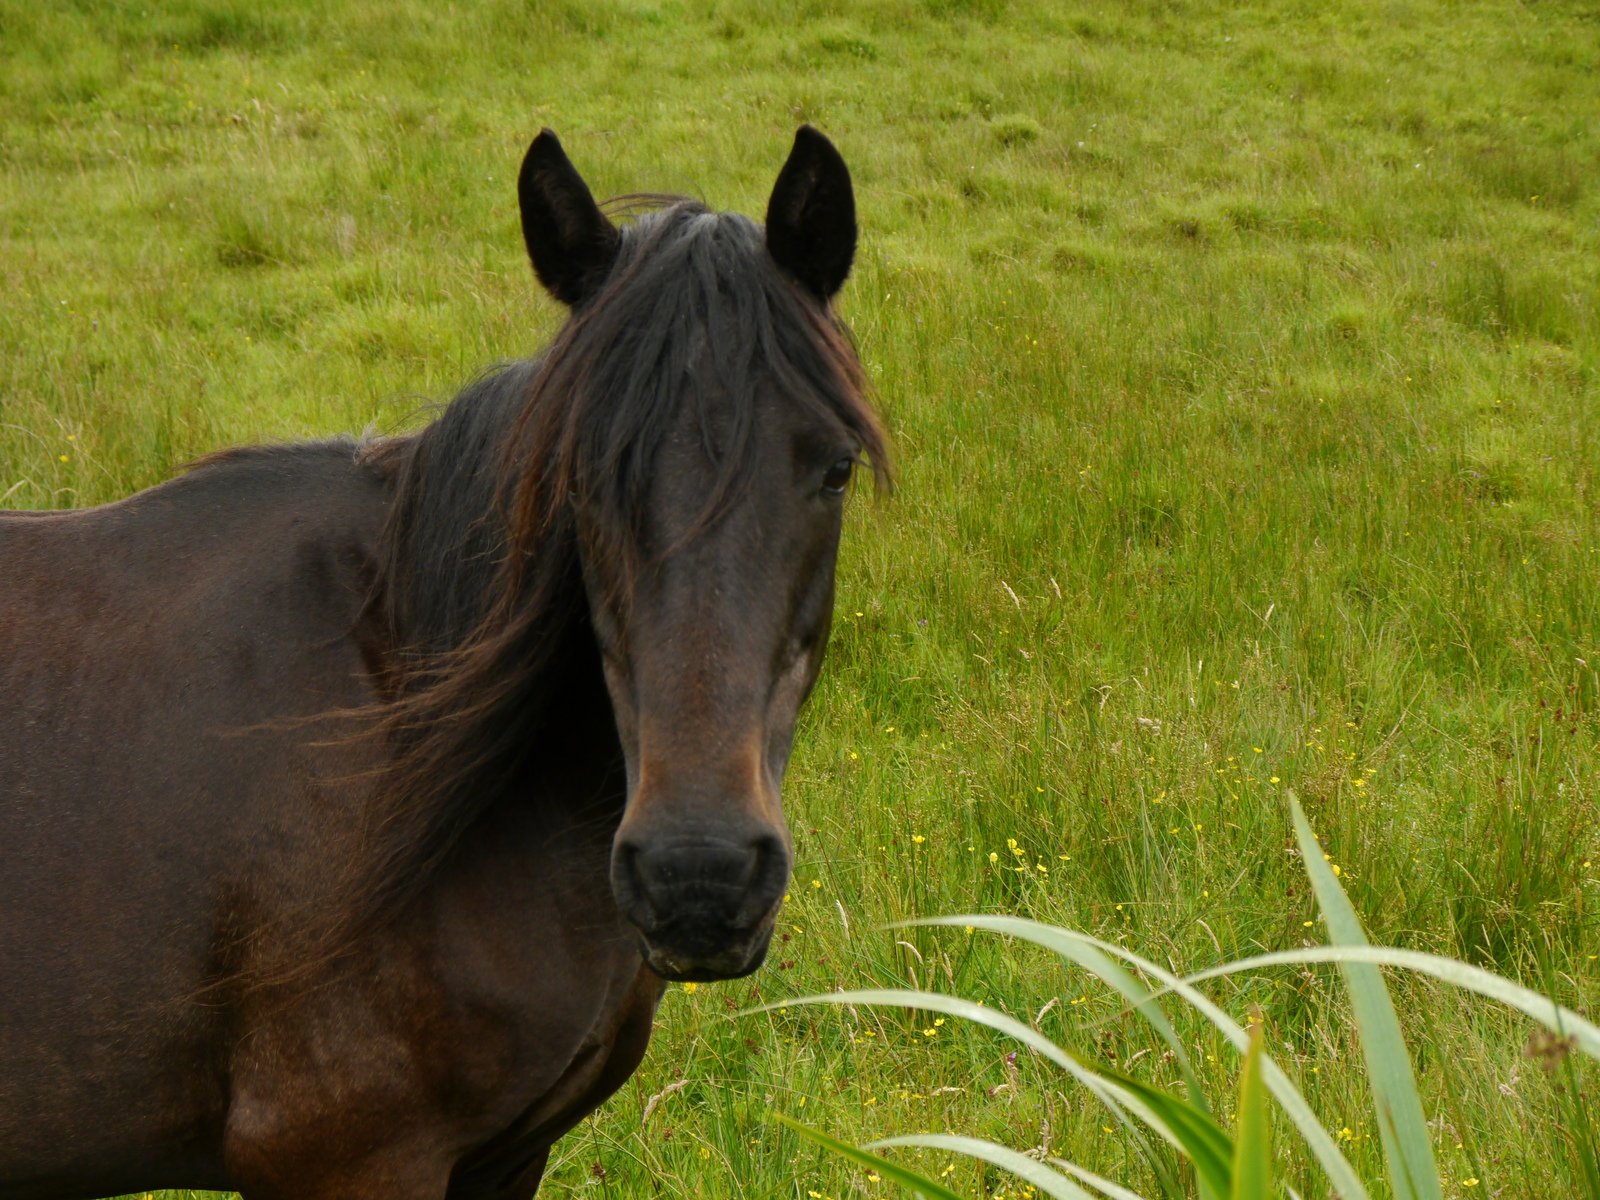 a horse is standing in a grassy field